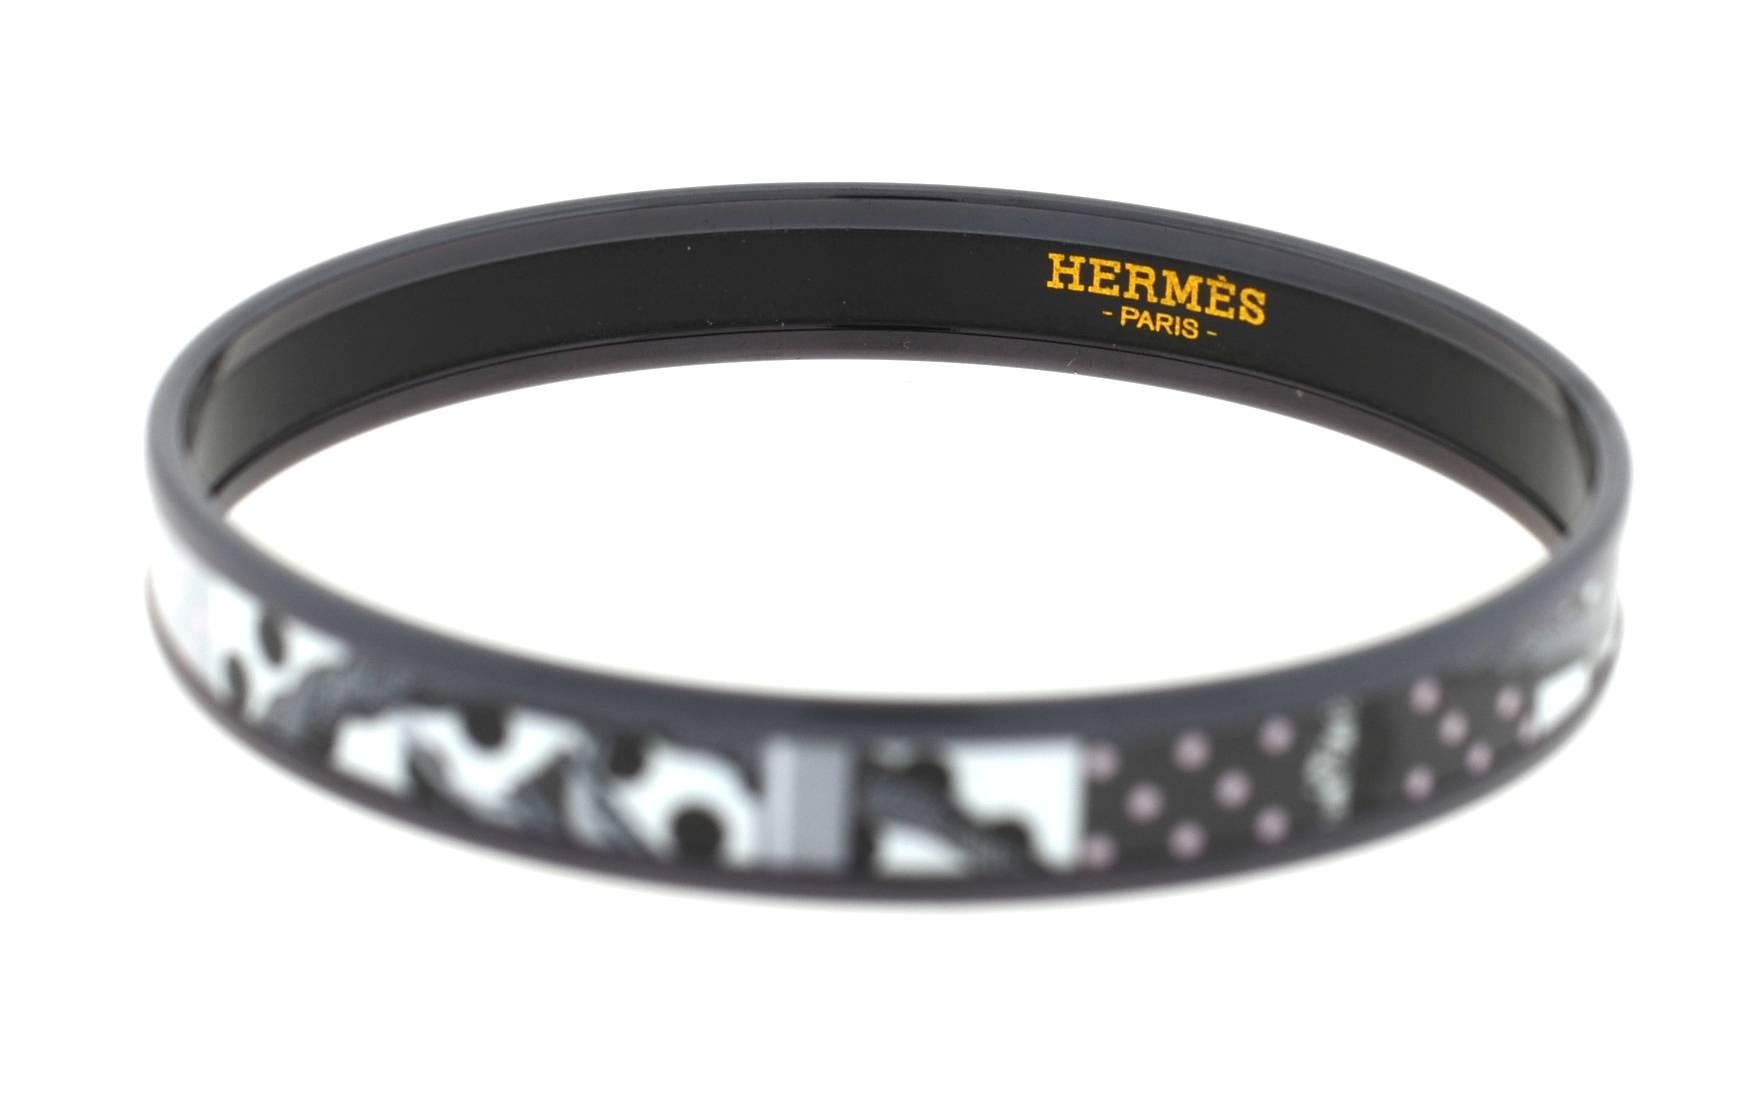 Hermes Thin Black and White Bangle Bracelet with Dustbag 1